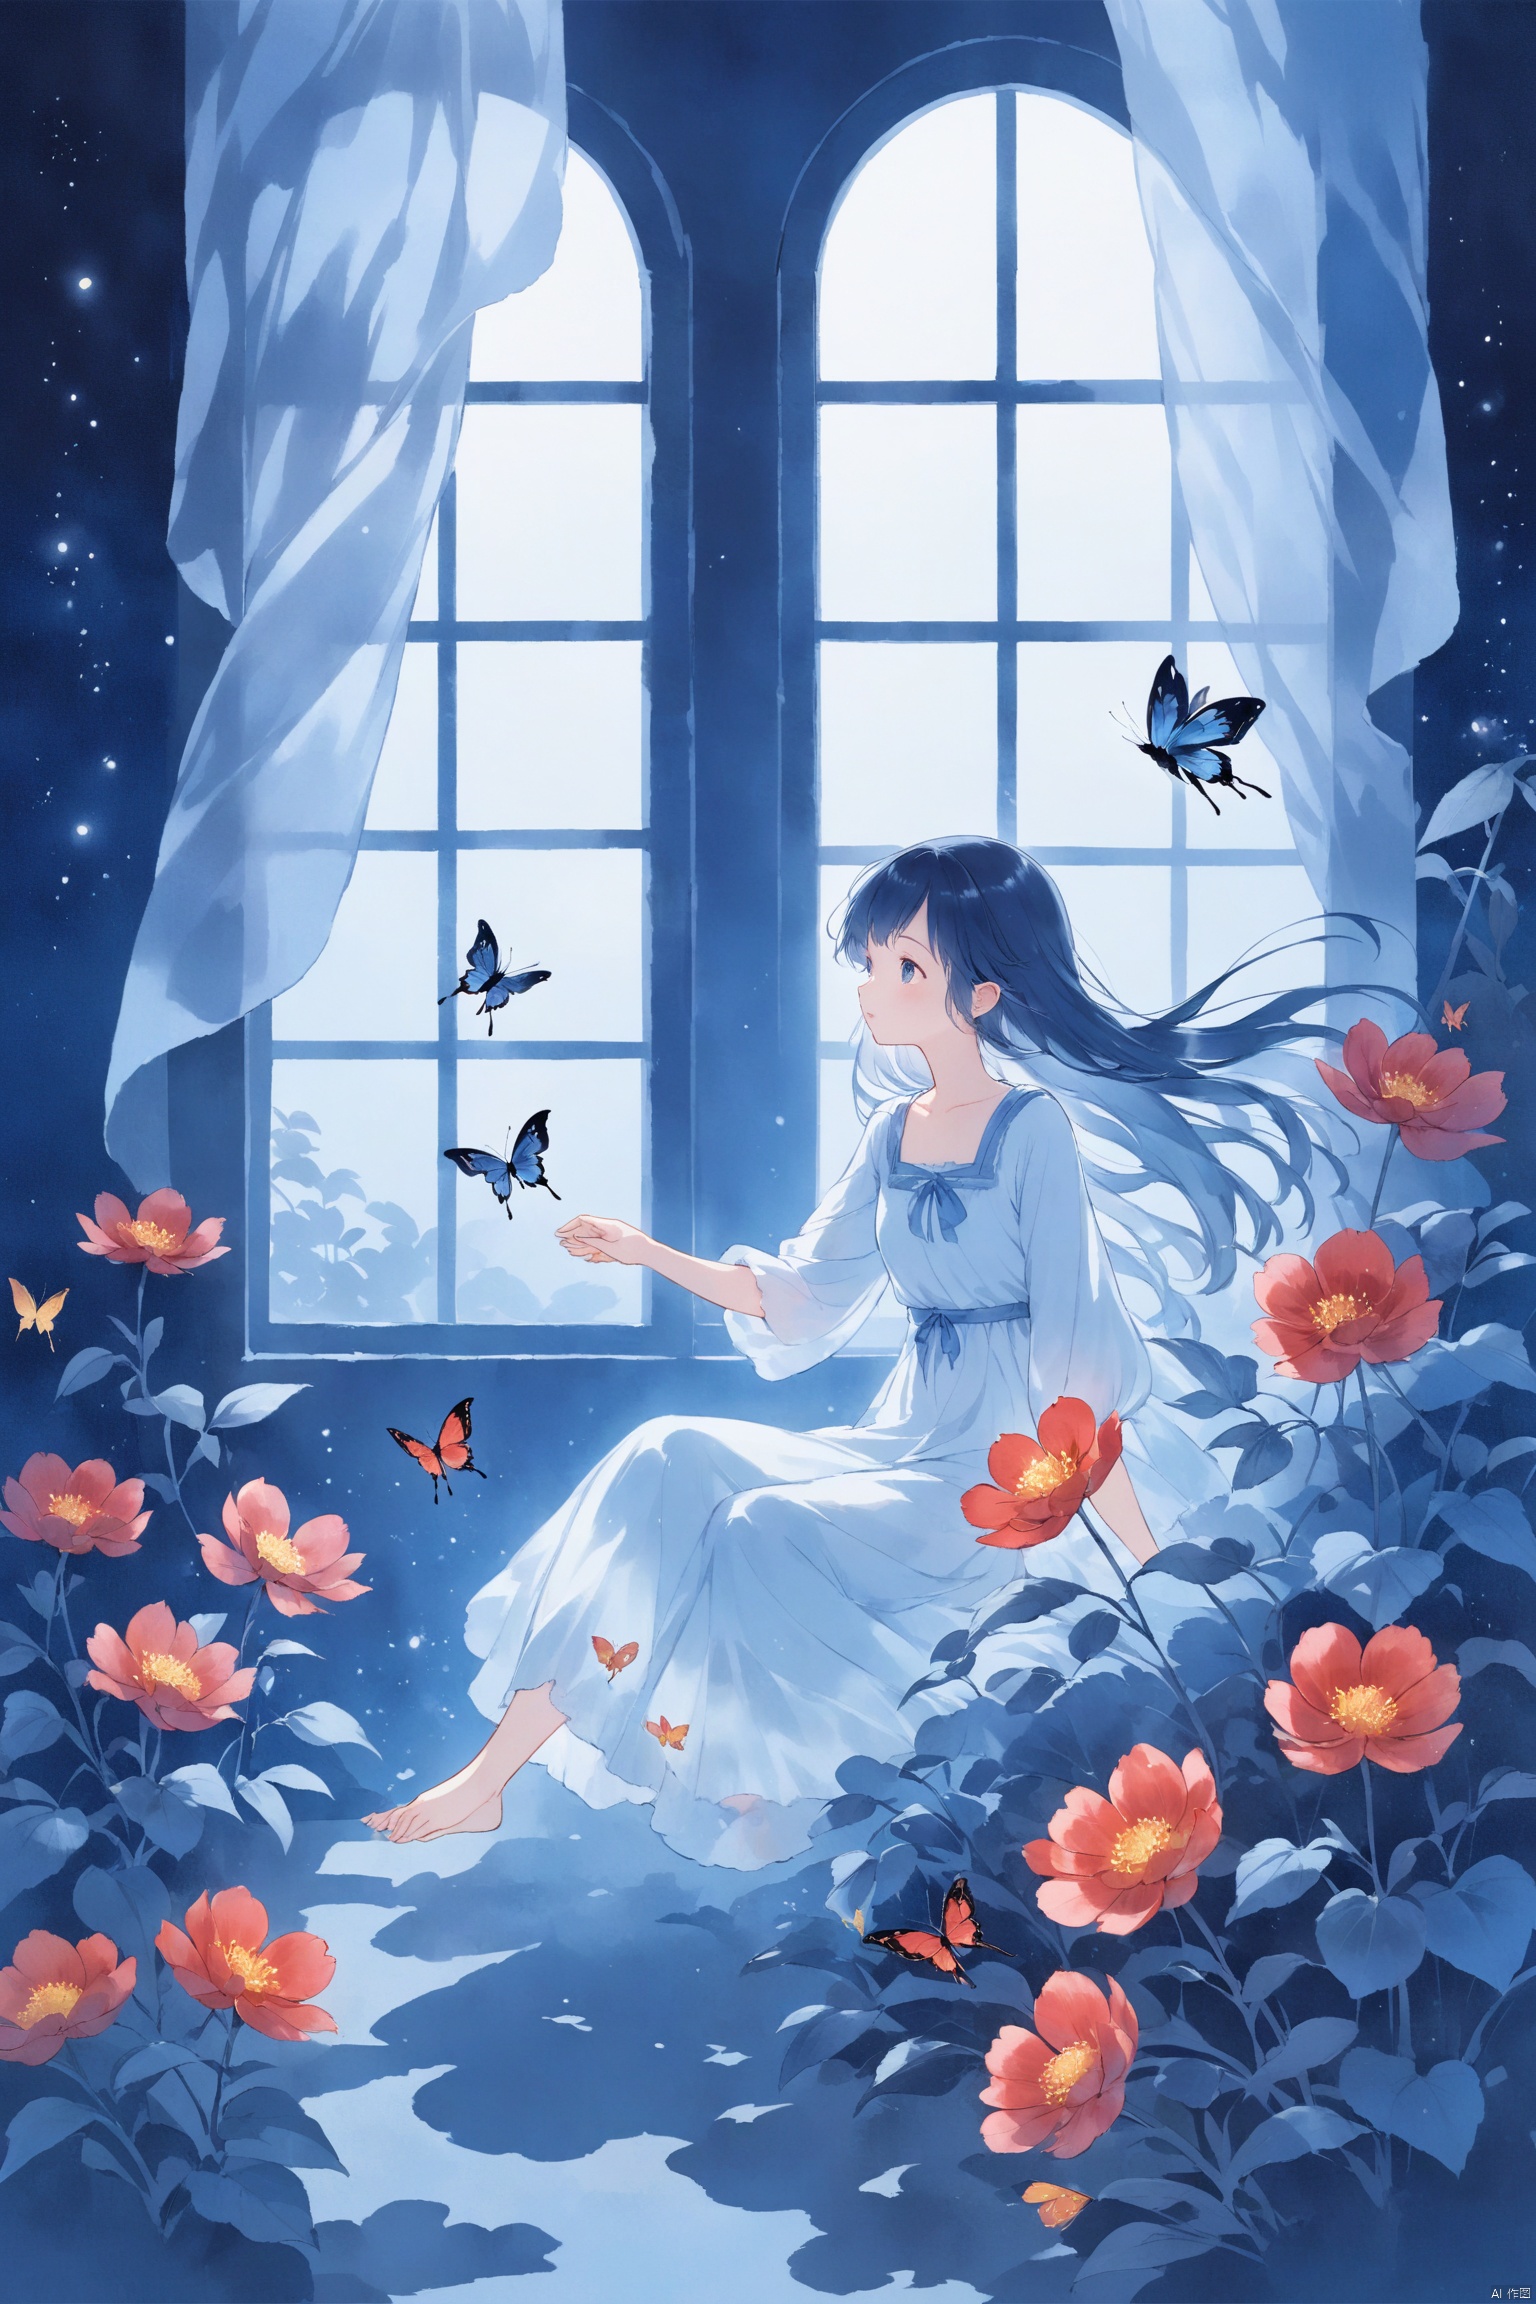 A fairy with wings, sitting on the edge of an open window next to flowers and plants in different colors. The background is a white curtain blowing gently in the style of a strong wind. In front there's another figure wearing red , holding up his hand as if showing something to him. A colorful butterfly flies around them. This scene has soft lighting and a dreamy atmosphere, reminiscent of whimsical children book illustrations or storybook pages. at night